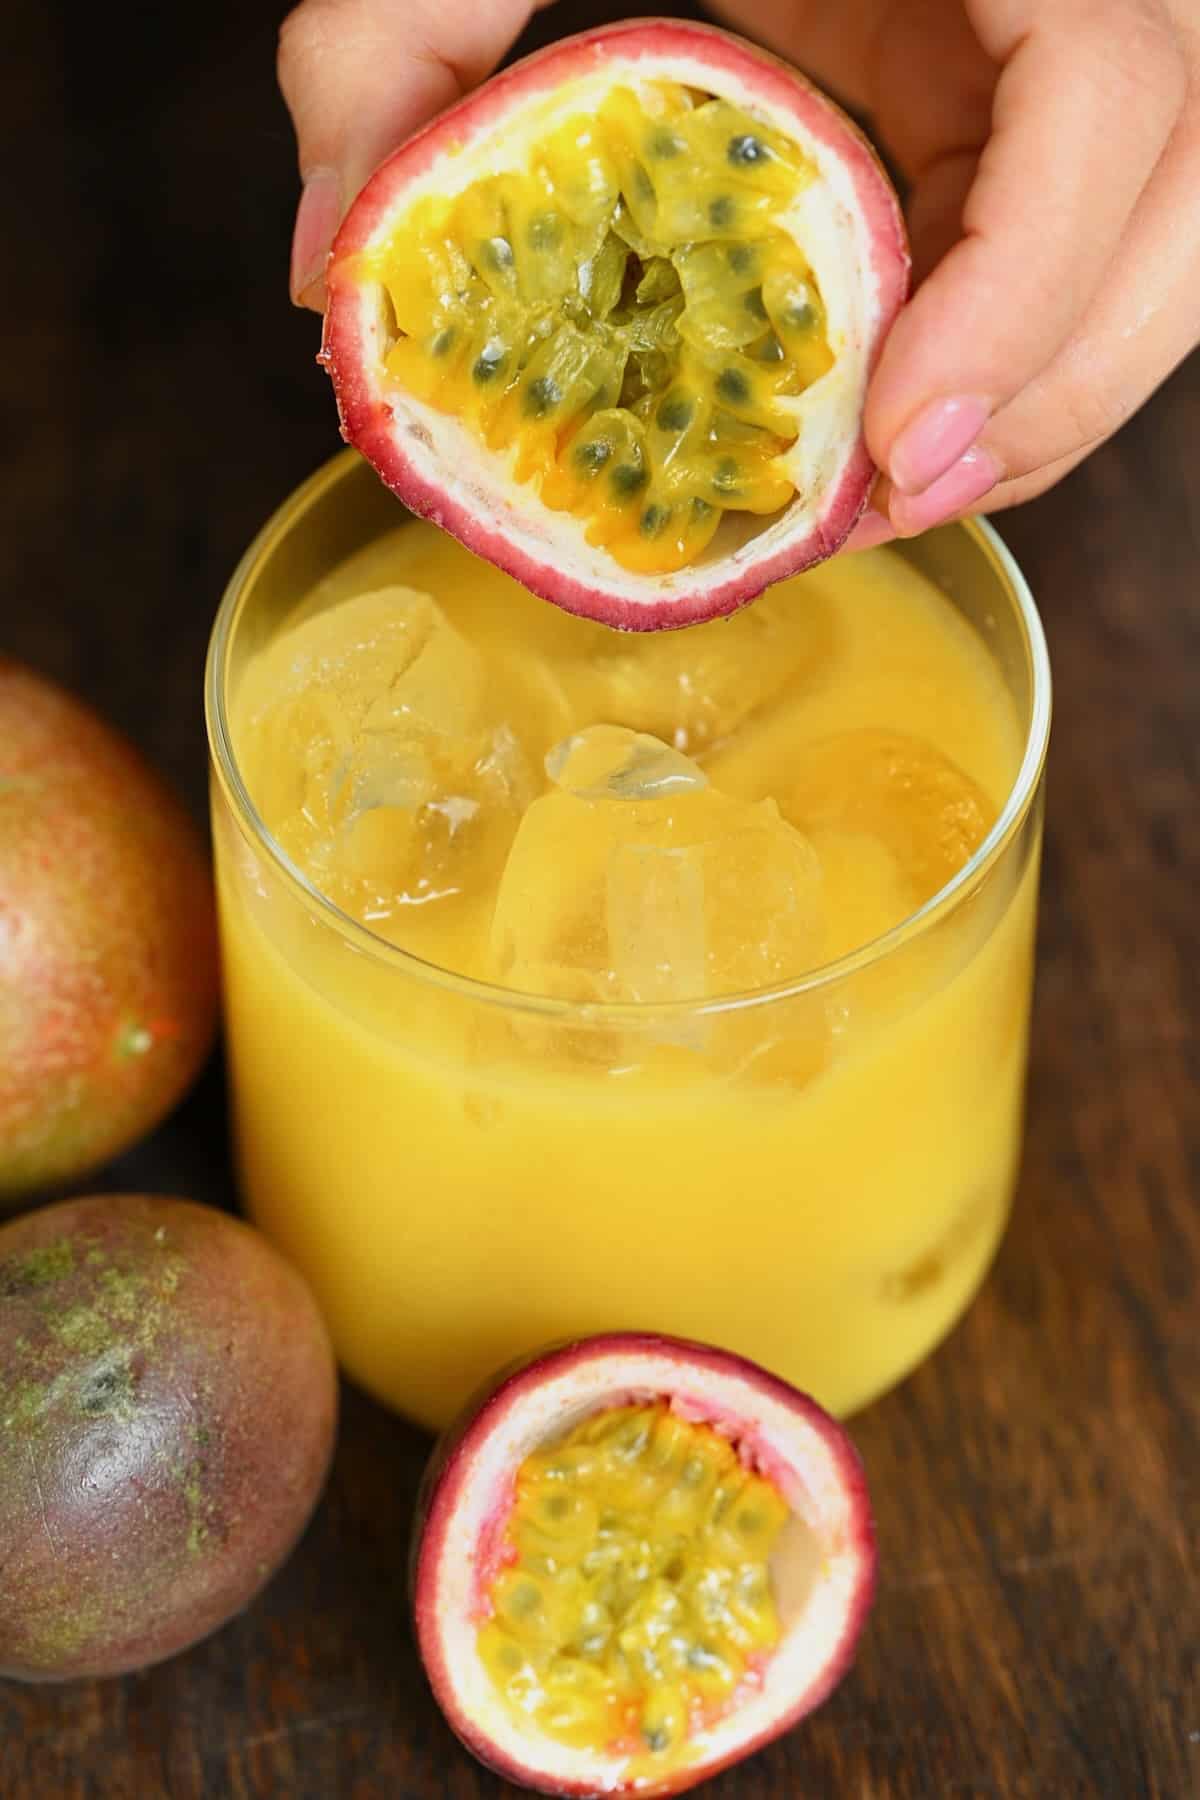 Half a passion fruit and a glass with passion fruit juice